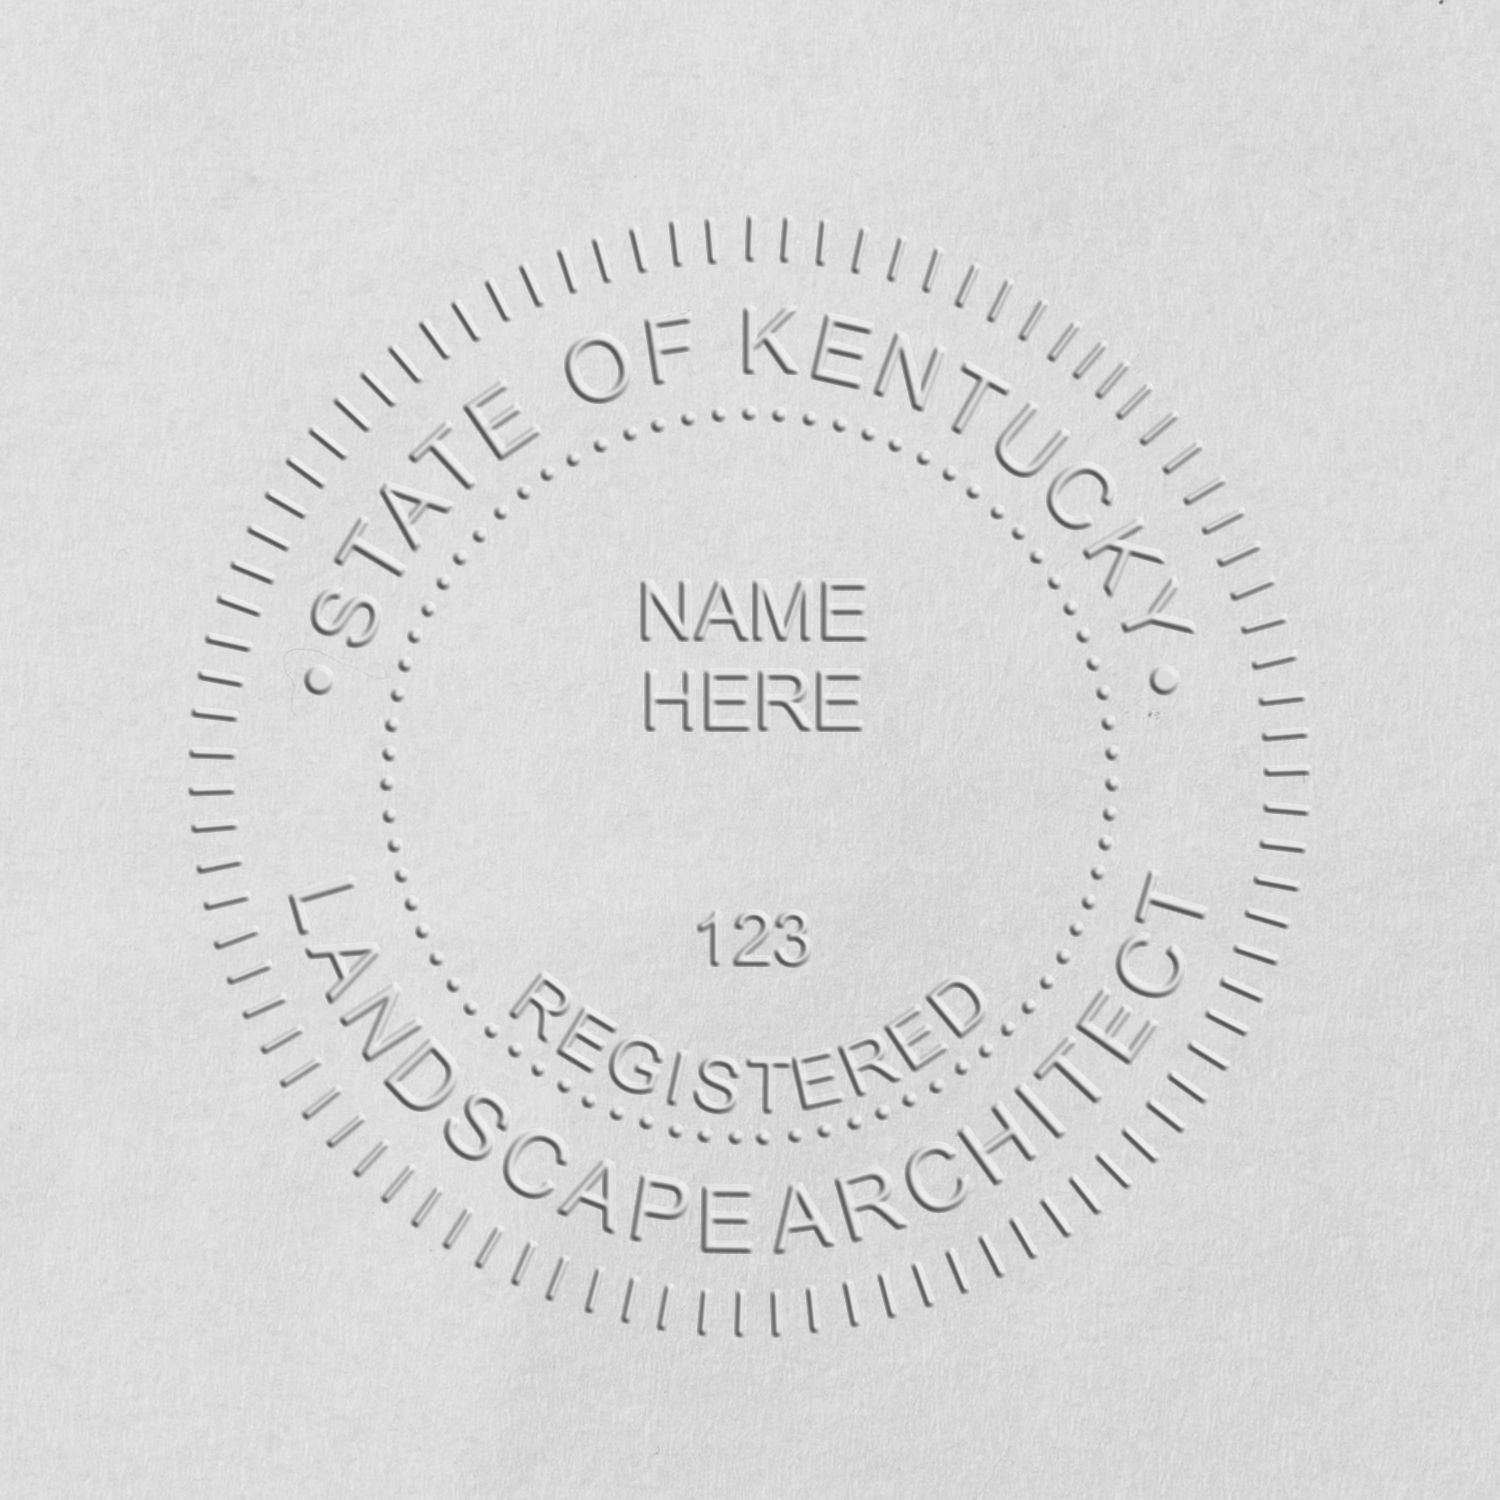 Another Example of a stamped impression of the State of Kentucky Extended Long Reach Landscape Architect Seal Embosser on a piece of office paper.